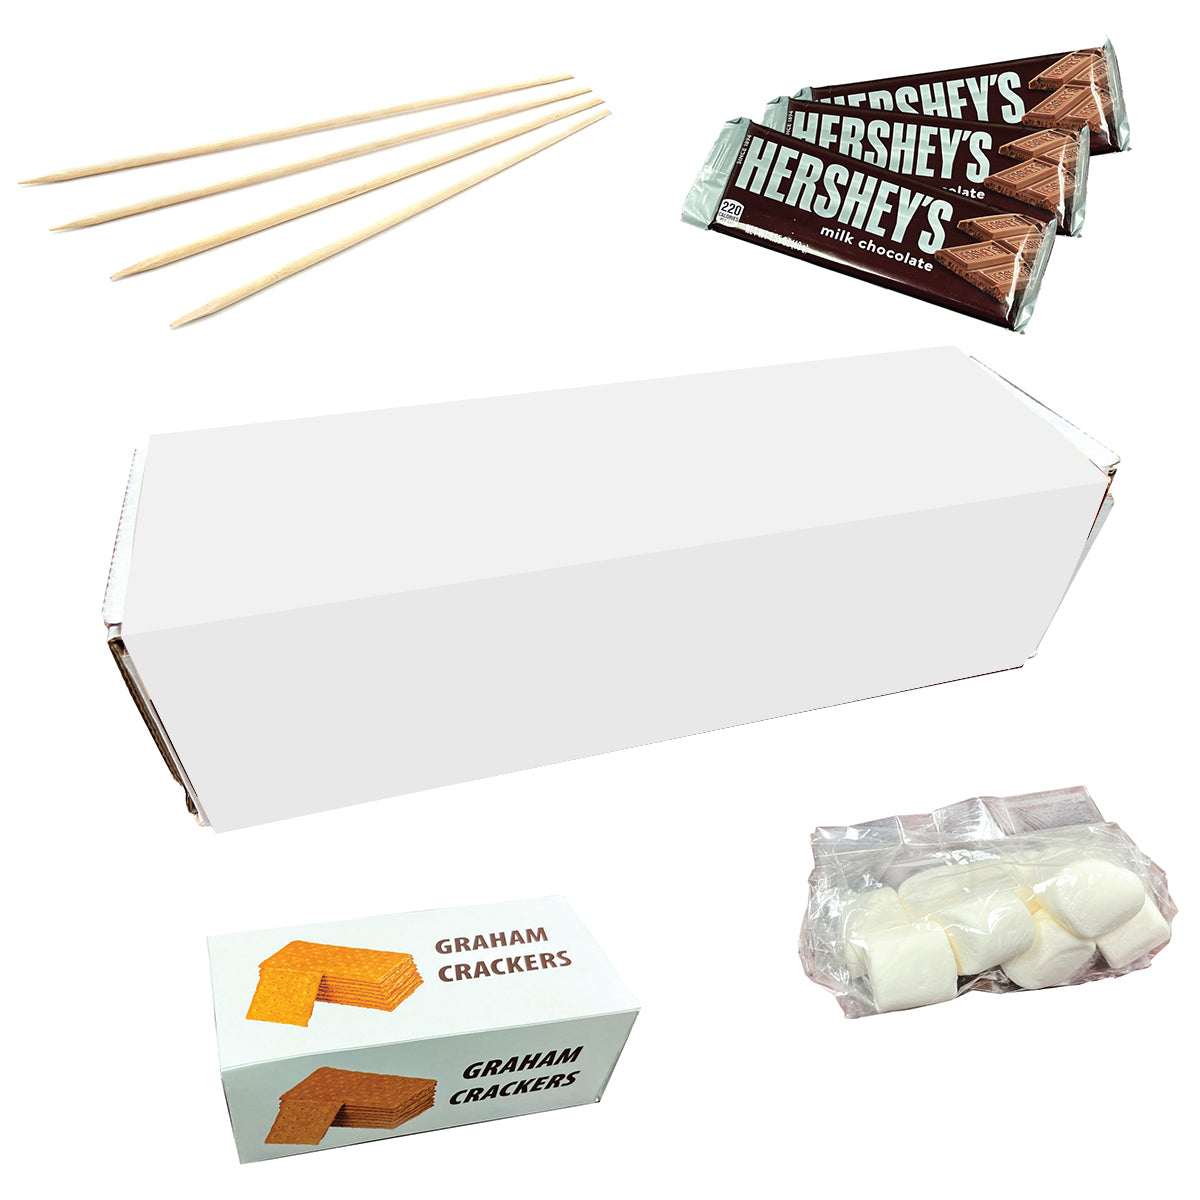 S'MORES CAMPFIRE KIT